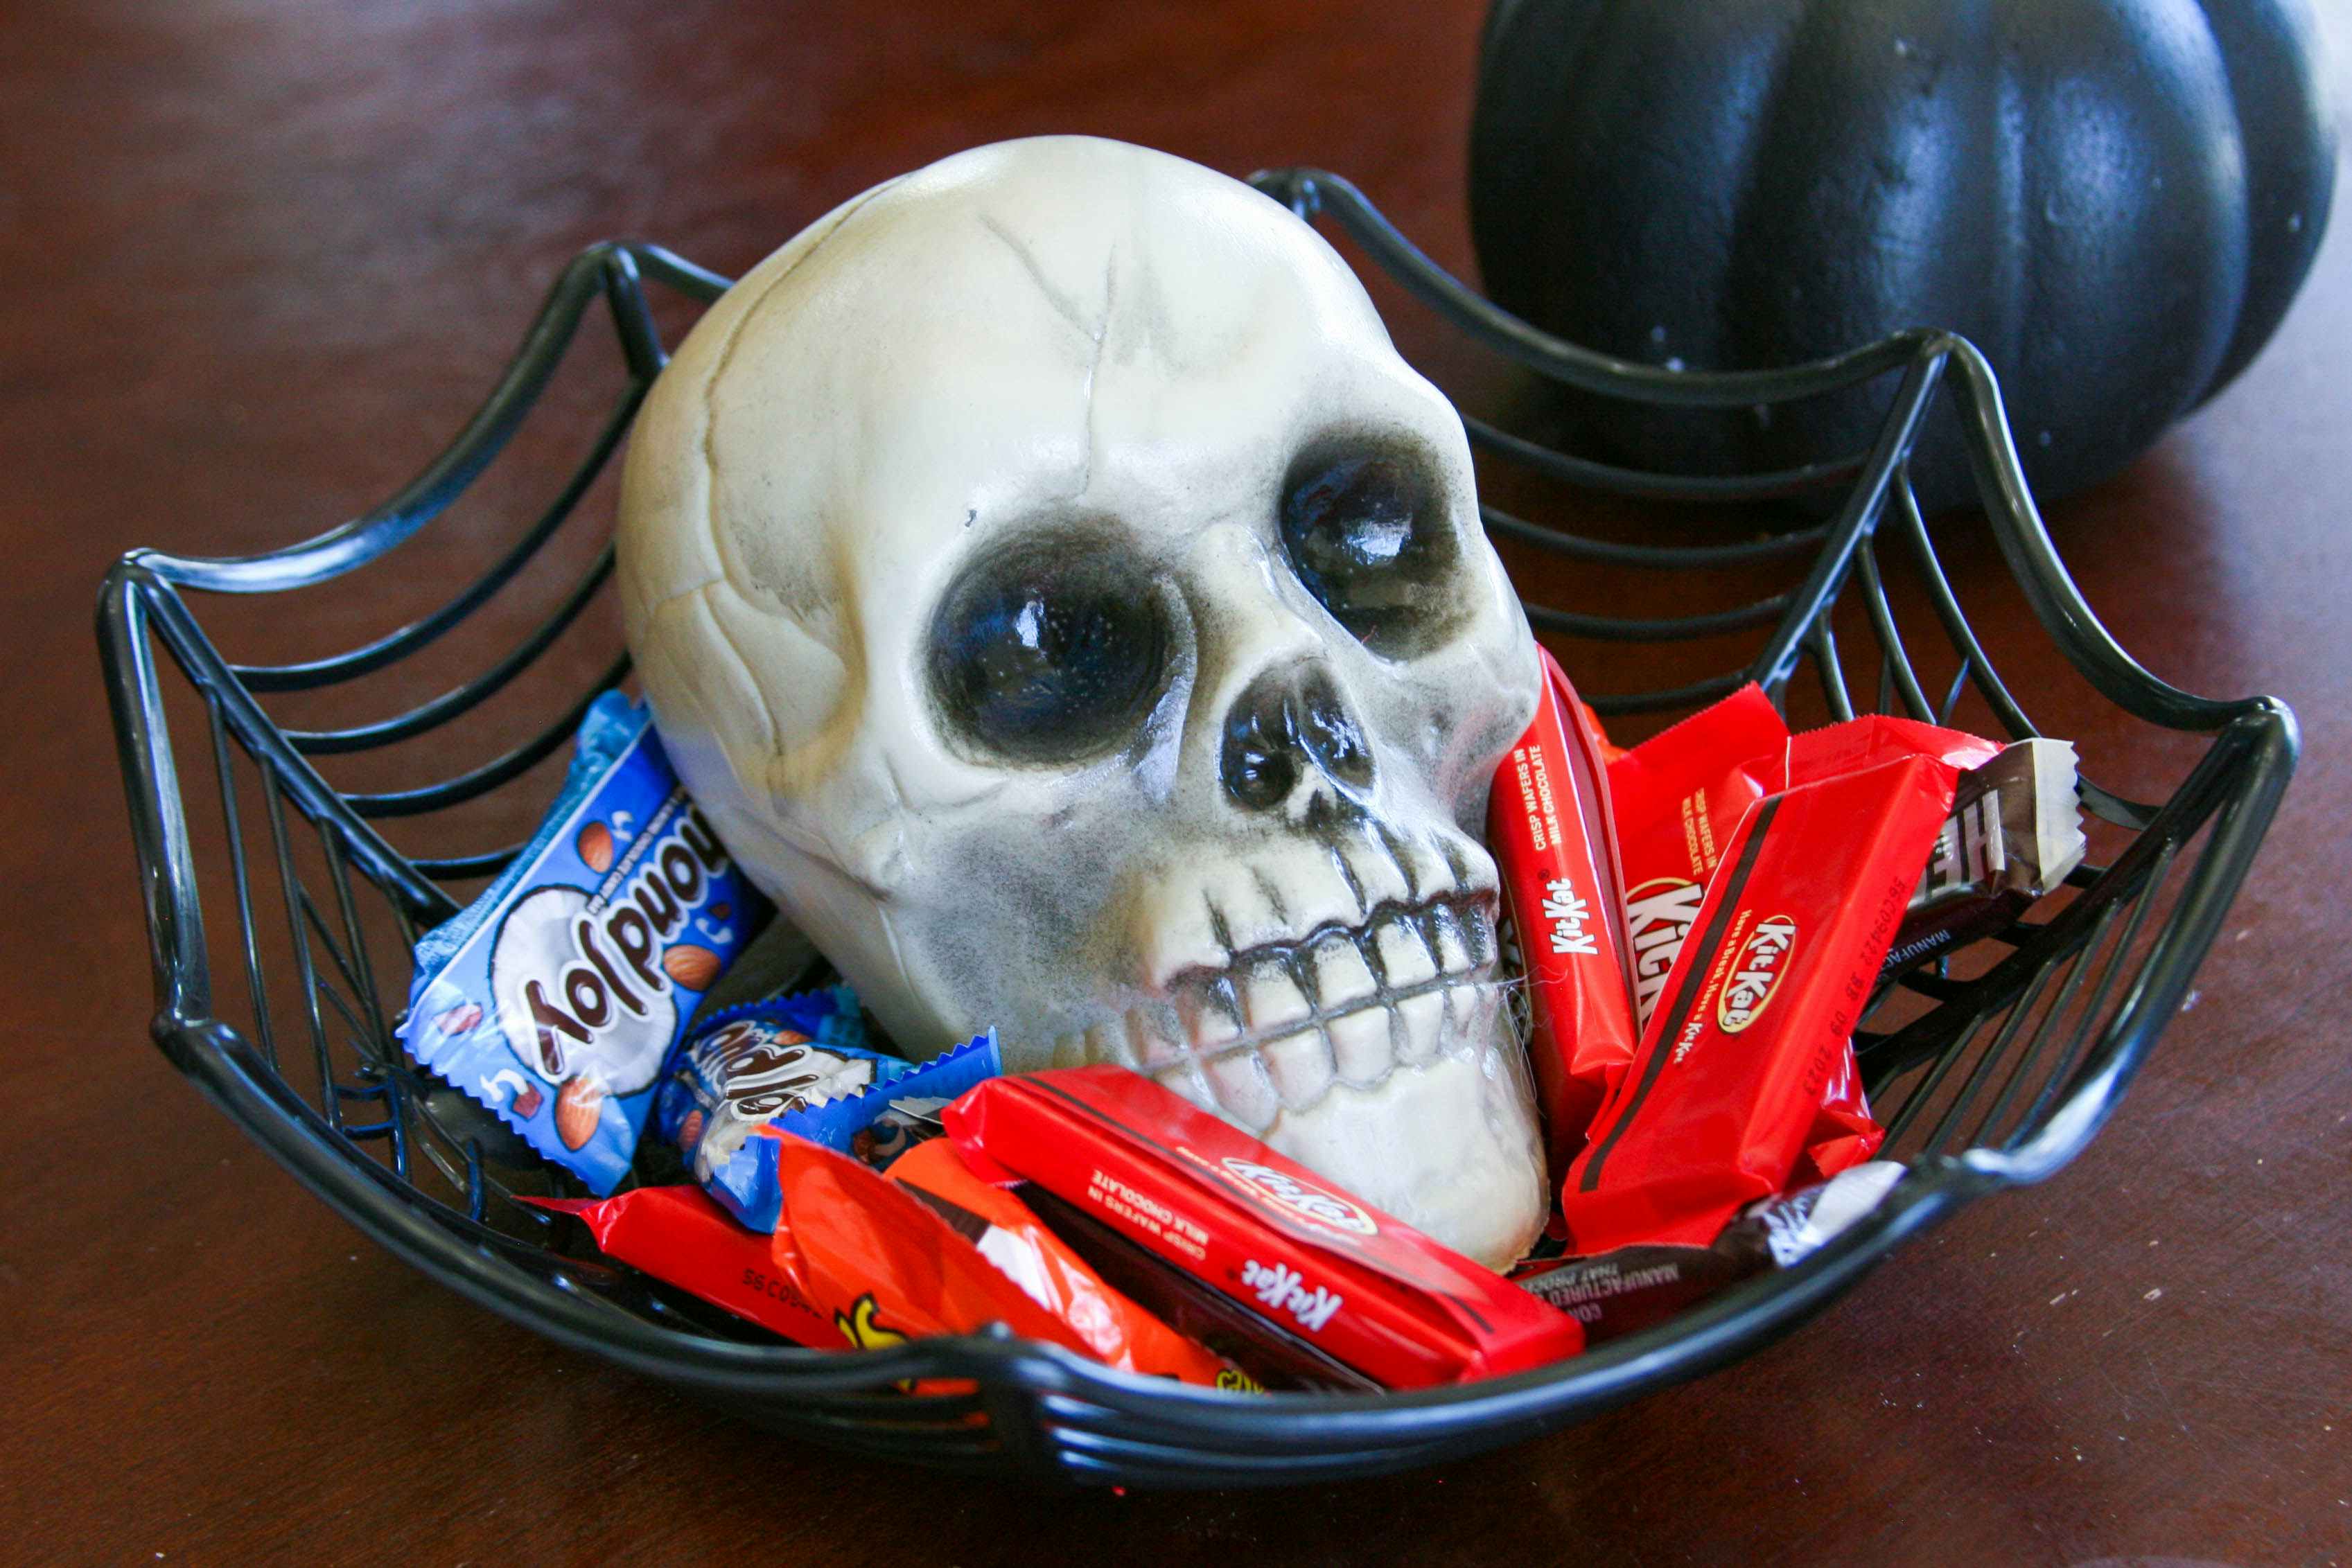 a skull inside a basket with candy in basket sitting on a table